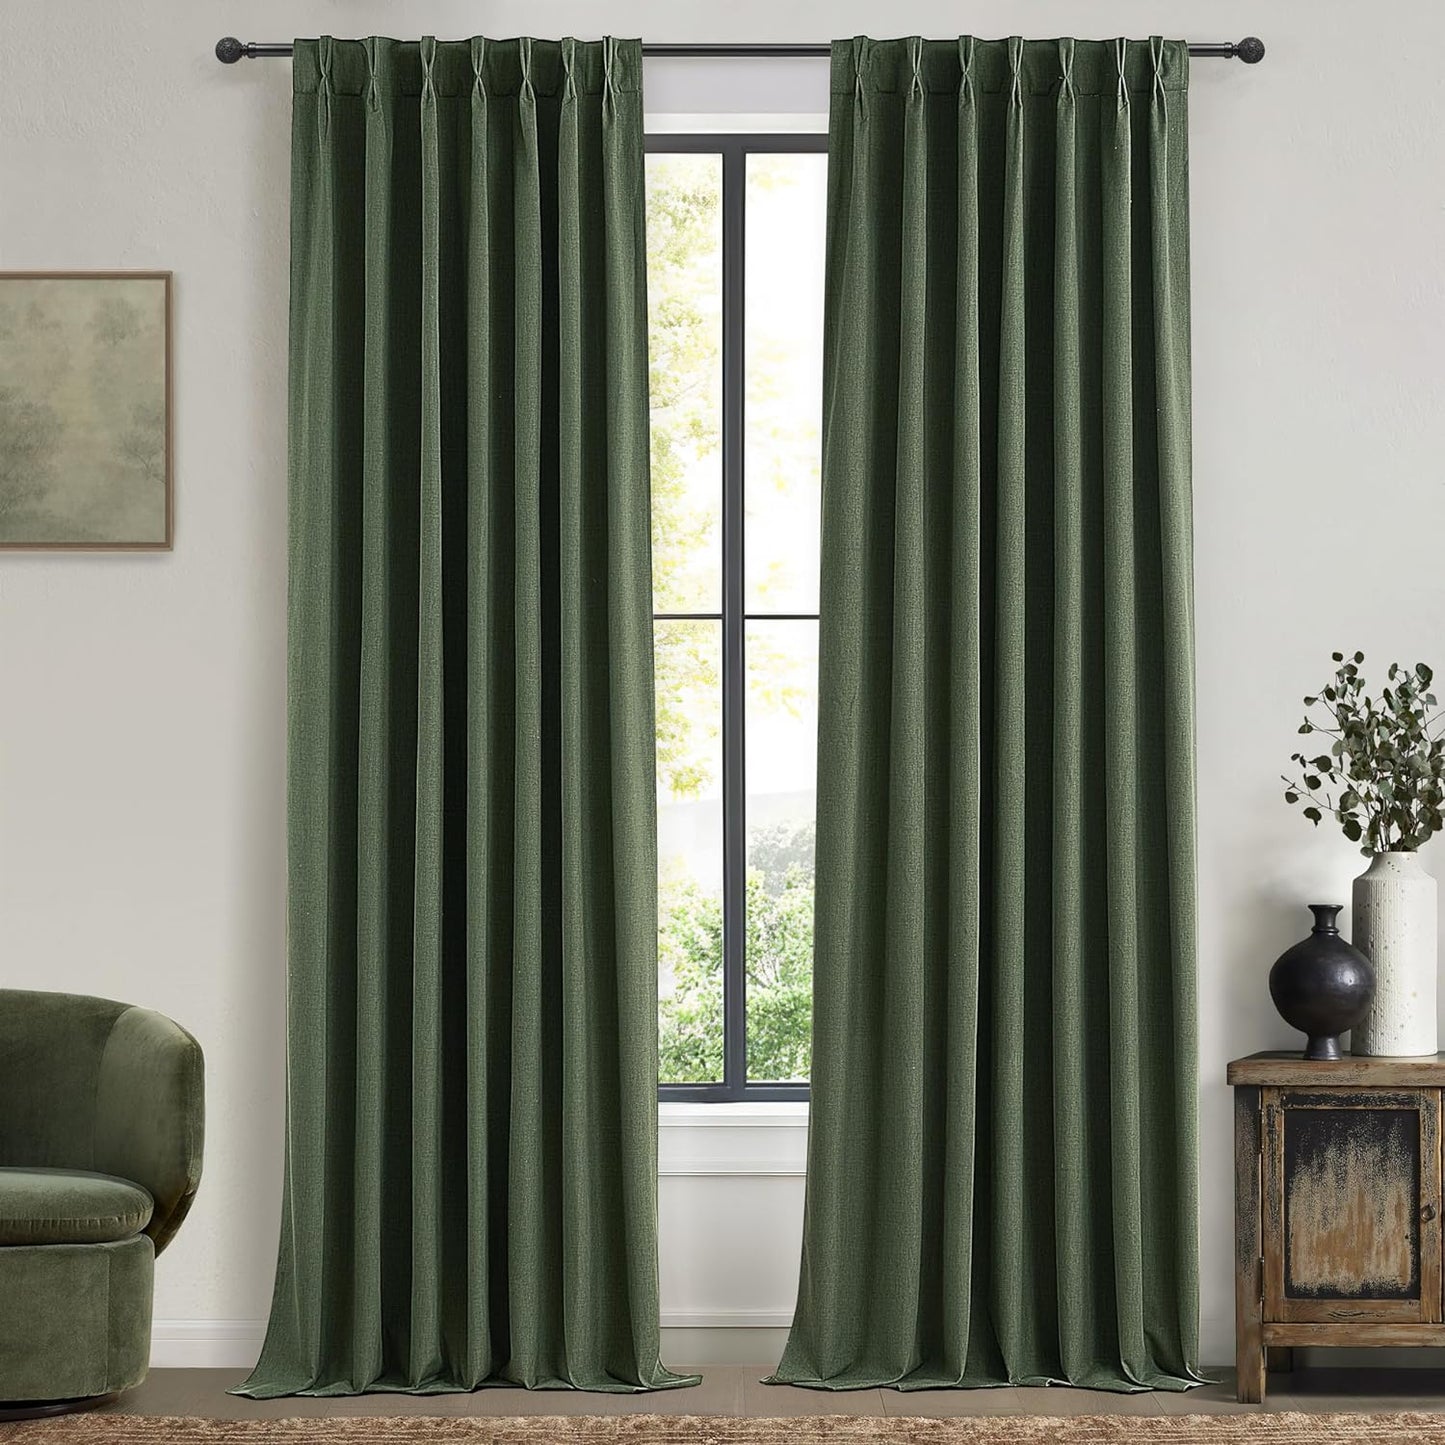 Natural Linen Pinch Pleated Blackout Curtains & Drapes 96 Inch Long Bedroom/Livingroom Farmhouse Curtains 2 Panel Sets, Neutral Track Room Darkening Thermal Insulated 8Ft Back Tab Window Curtain  QJmydeco Loden 40"W X 102"L X 2 Panels 